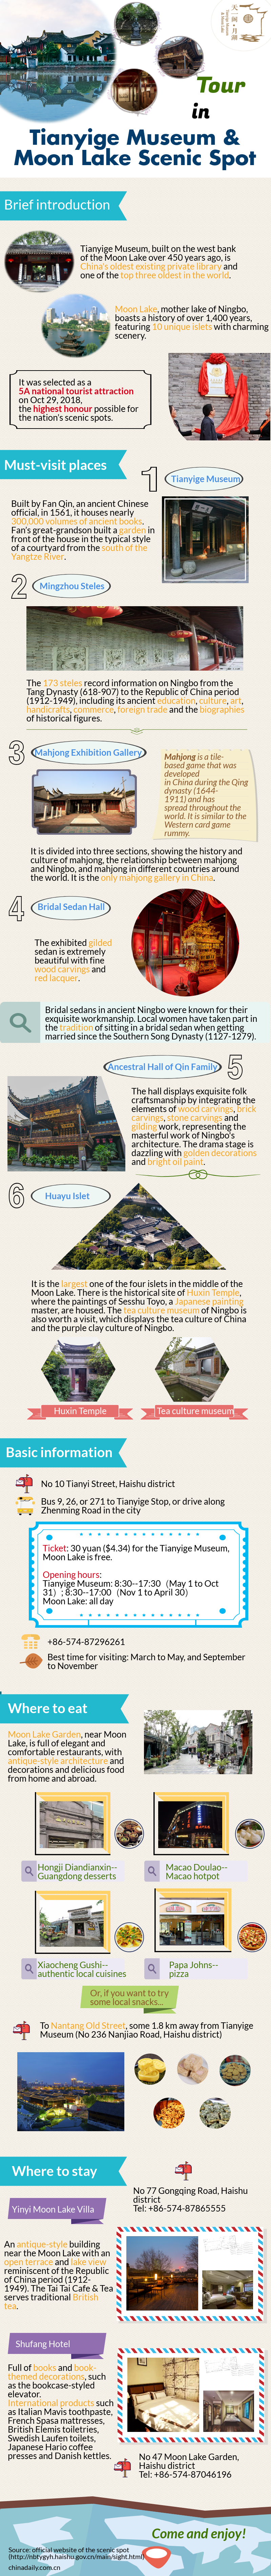 Tour in Tianyige Museum & Moon Lake Scenic Spot.png